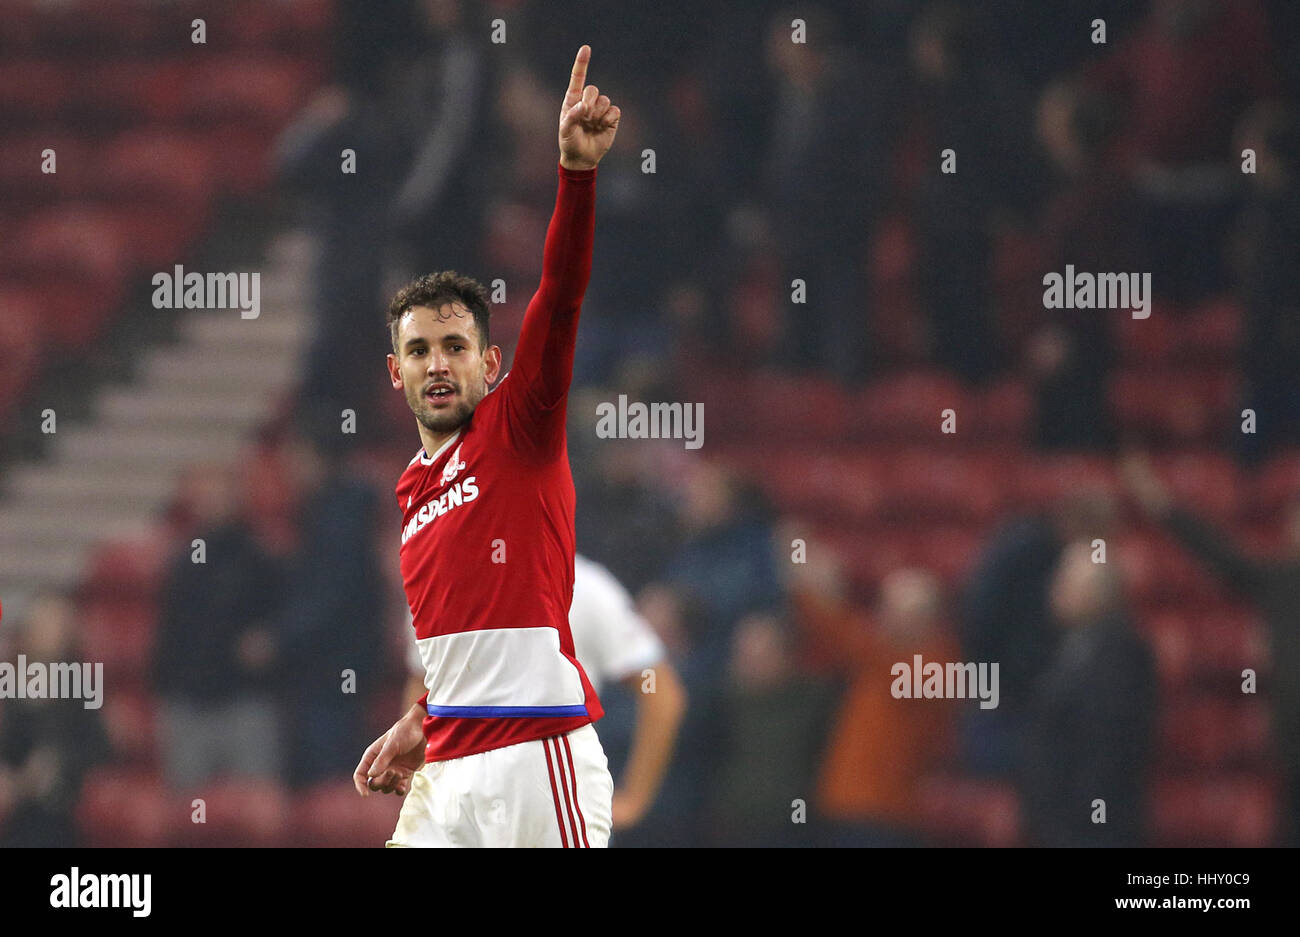 Middlesbrough's Cristhian Stuani celebrates scoring his side's first goal during the Premier League match at the Riverside Stadium, Middlesbrough. Stock Photo